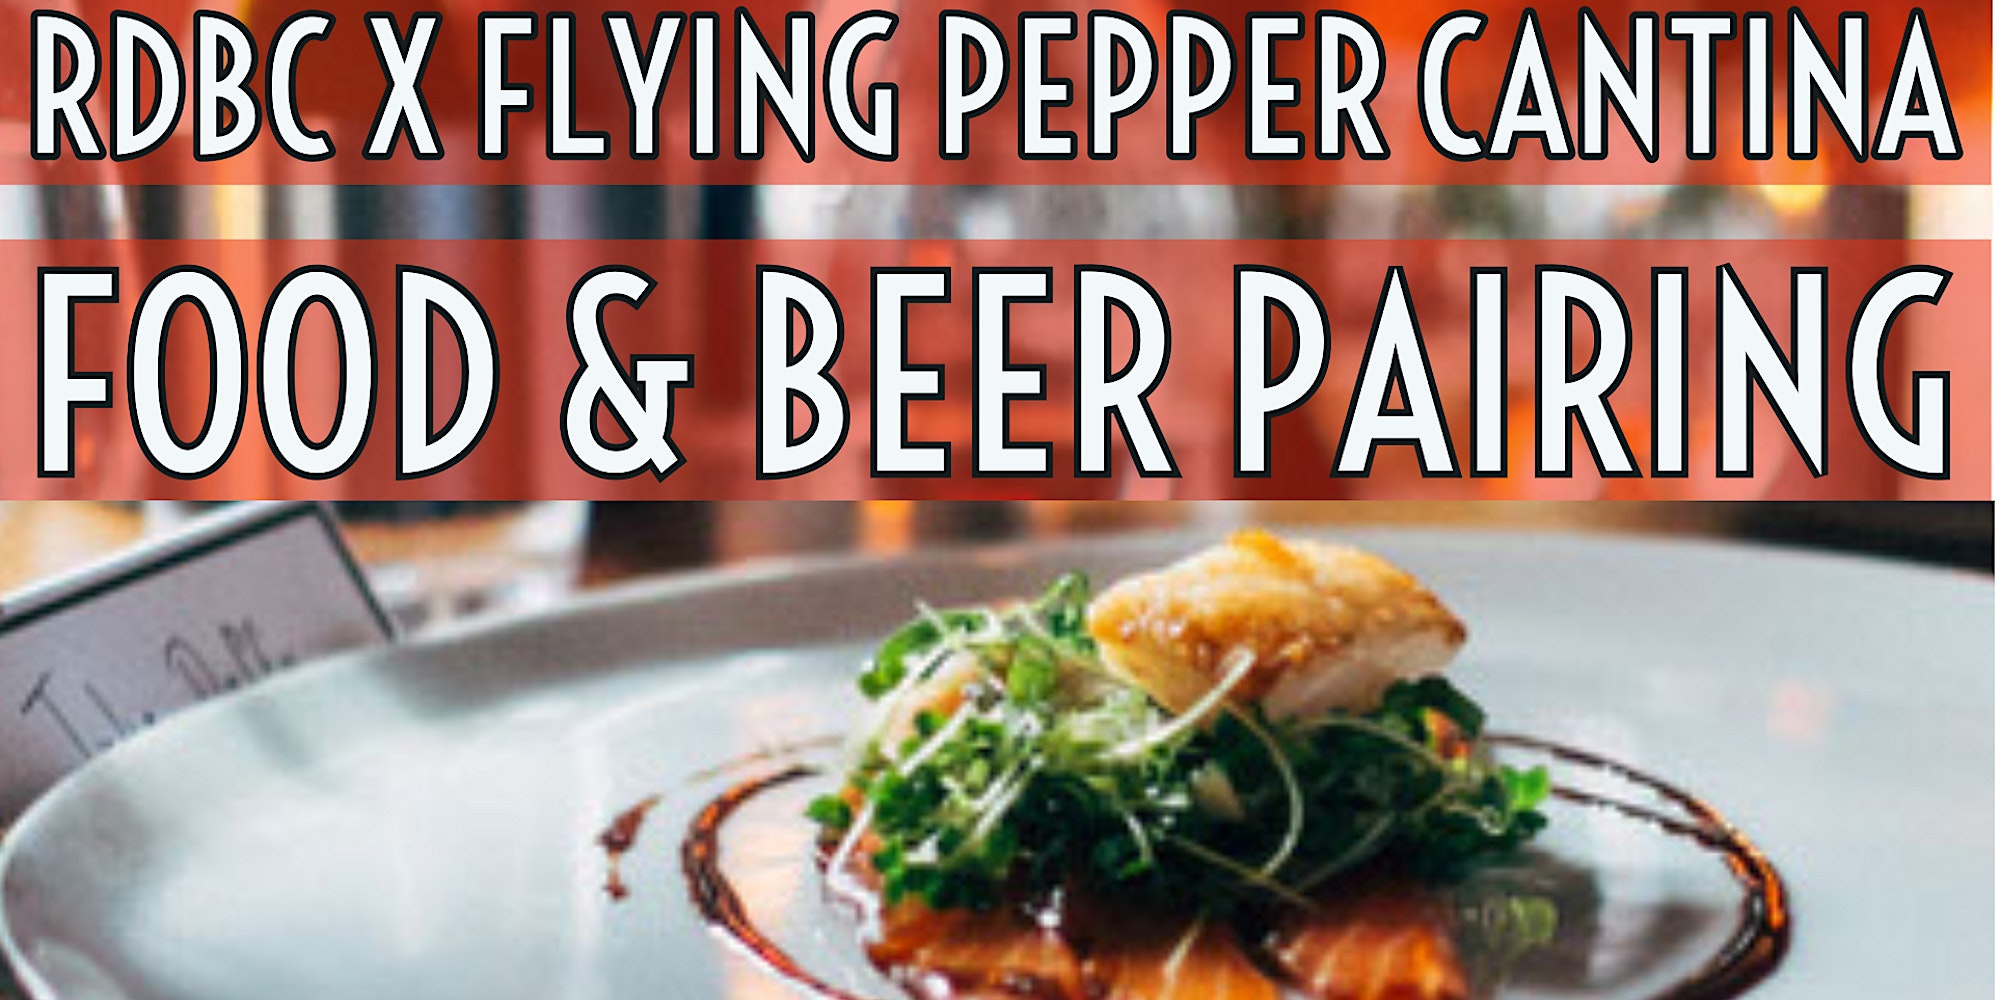 It’s Back: Everyone’s Favorite Unique Food and Beer Pairing